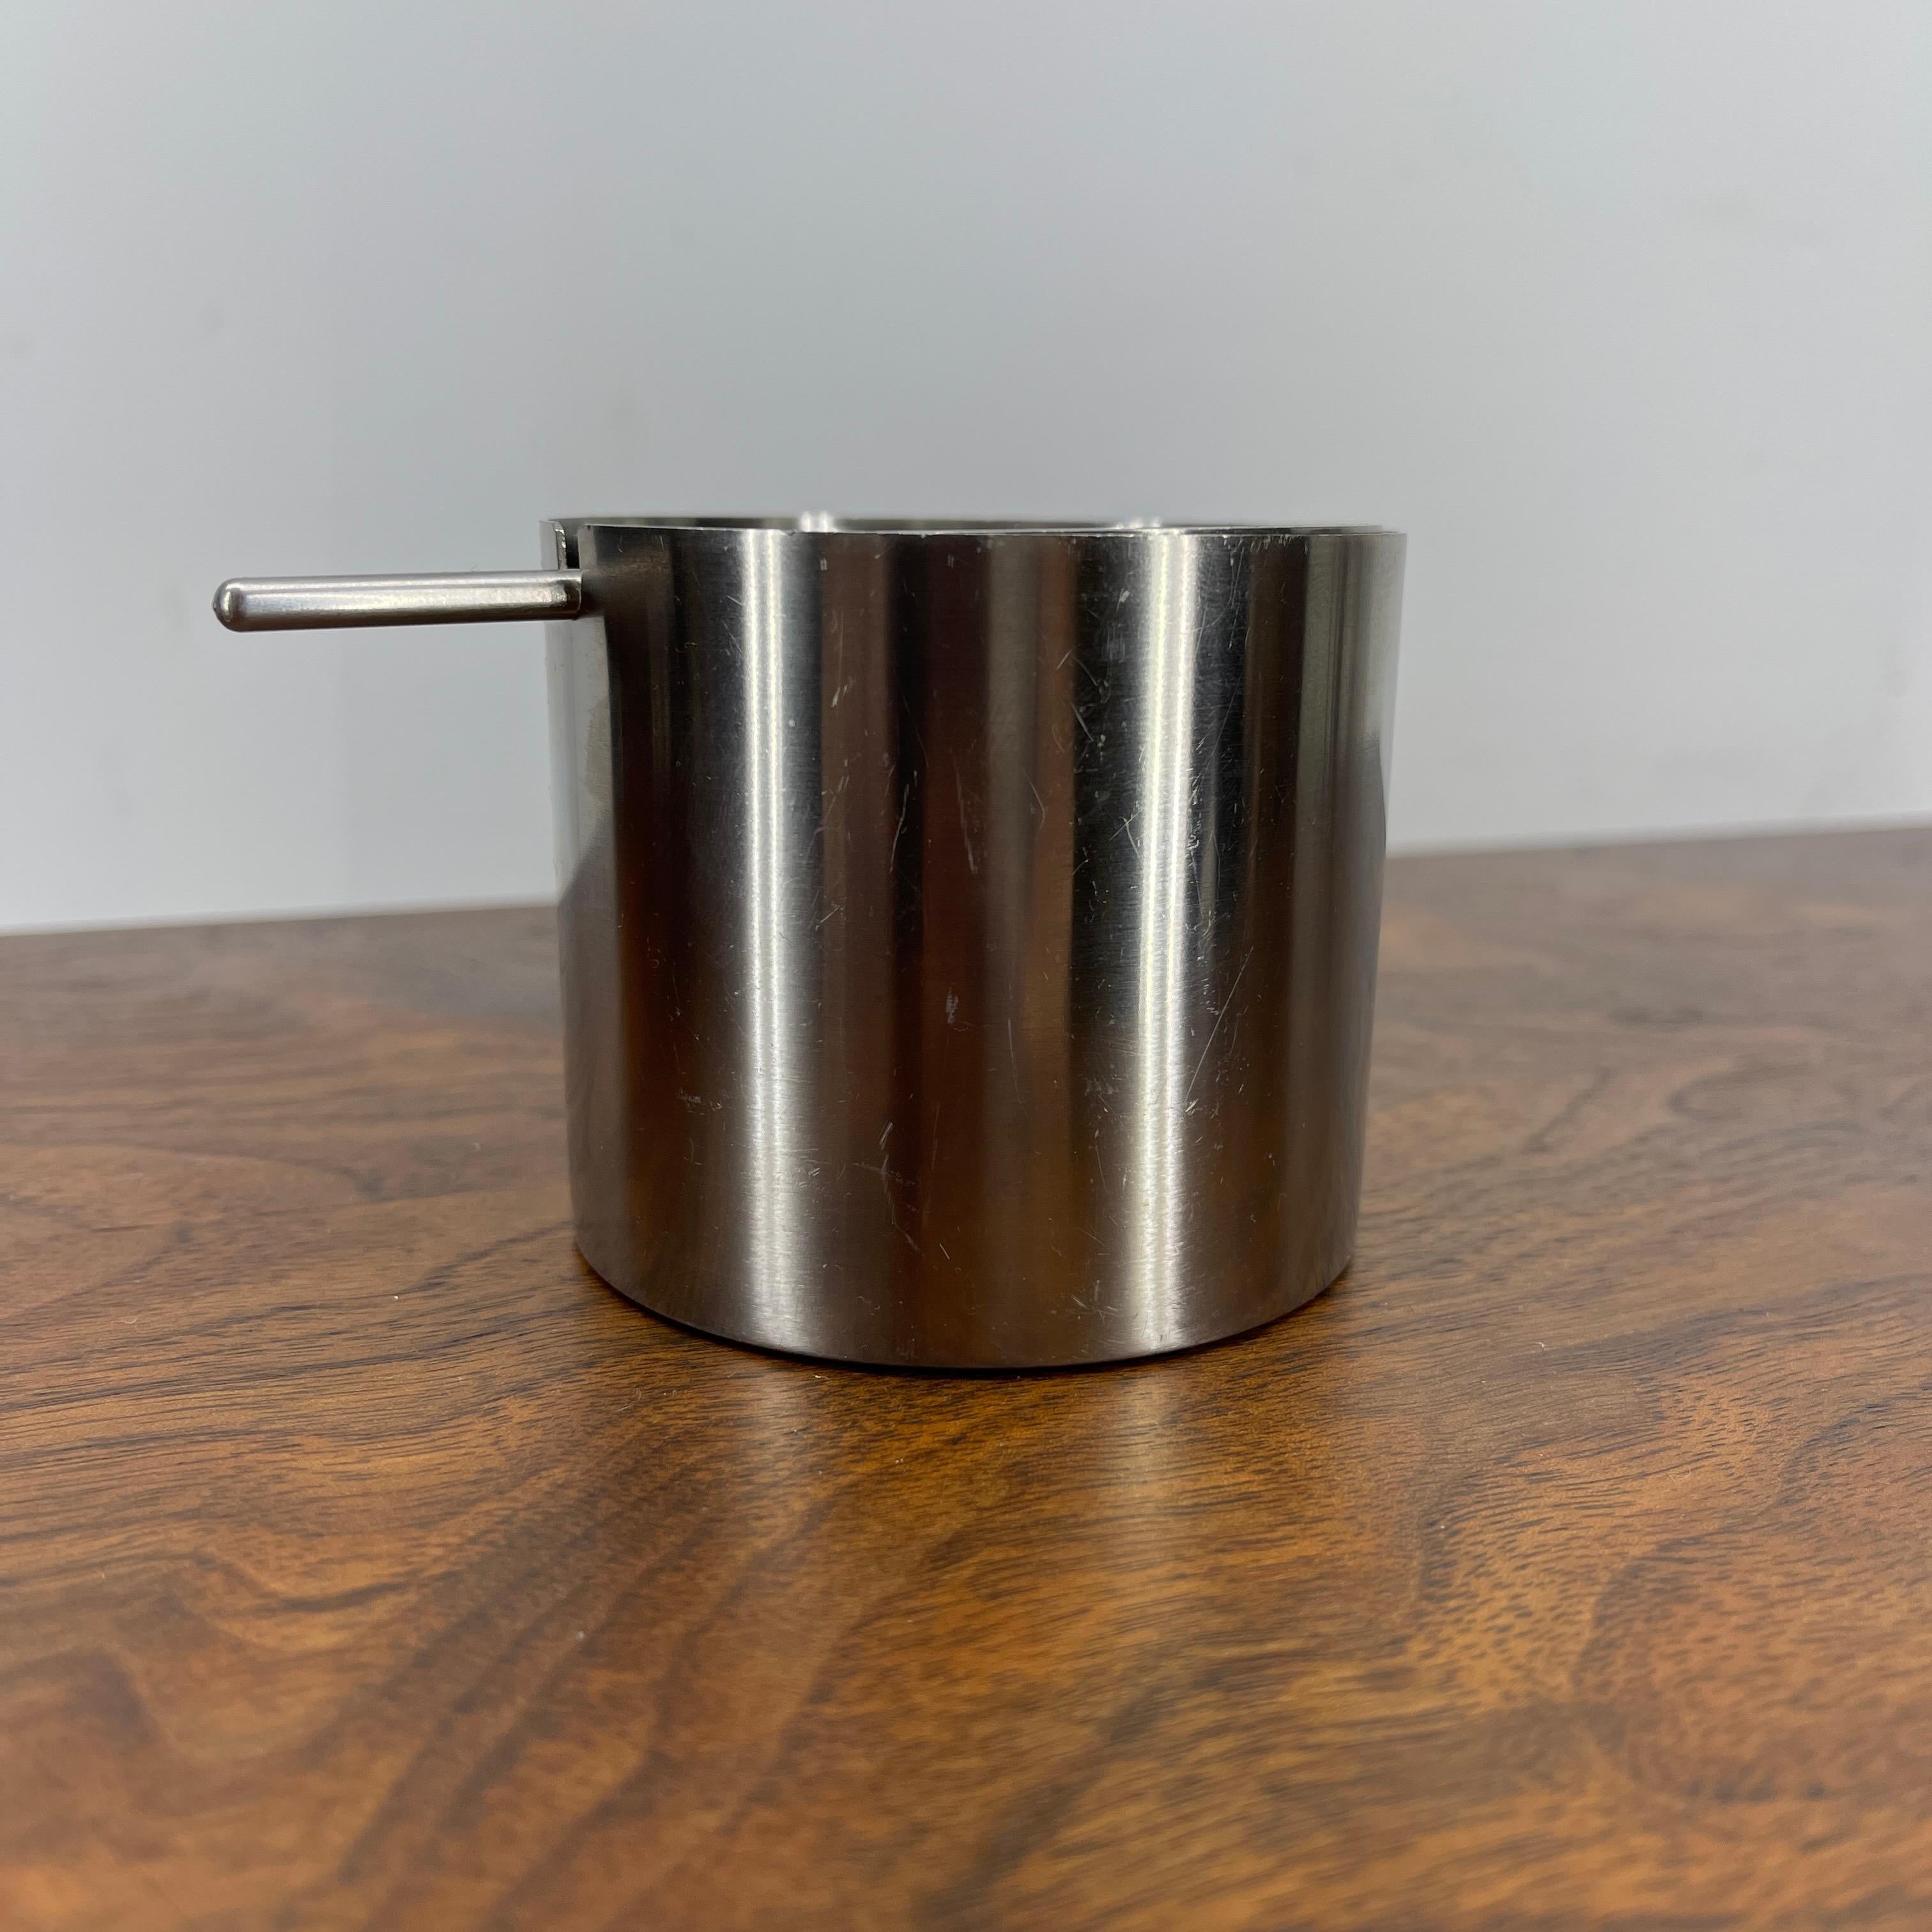 Arne Jacobsen stainless steel cylinda series ashtray for Stelton.
Mid-Century Modern classic Danish ashtray. The ashtray is beautiful in it's simplicity. The stainless steel glows. The ashtray is as functional as it stylish.